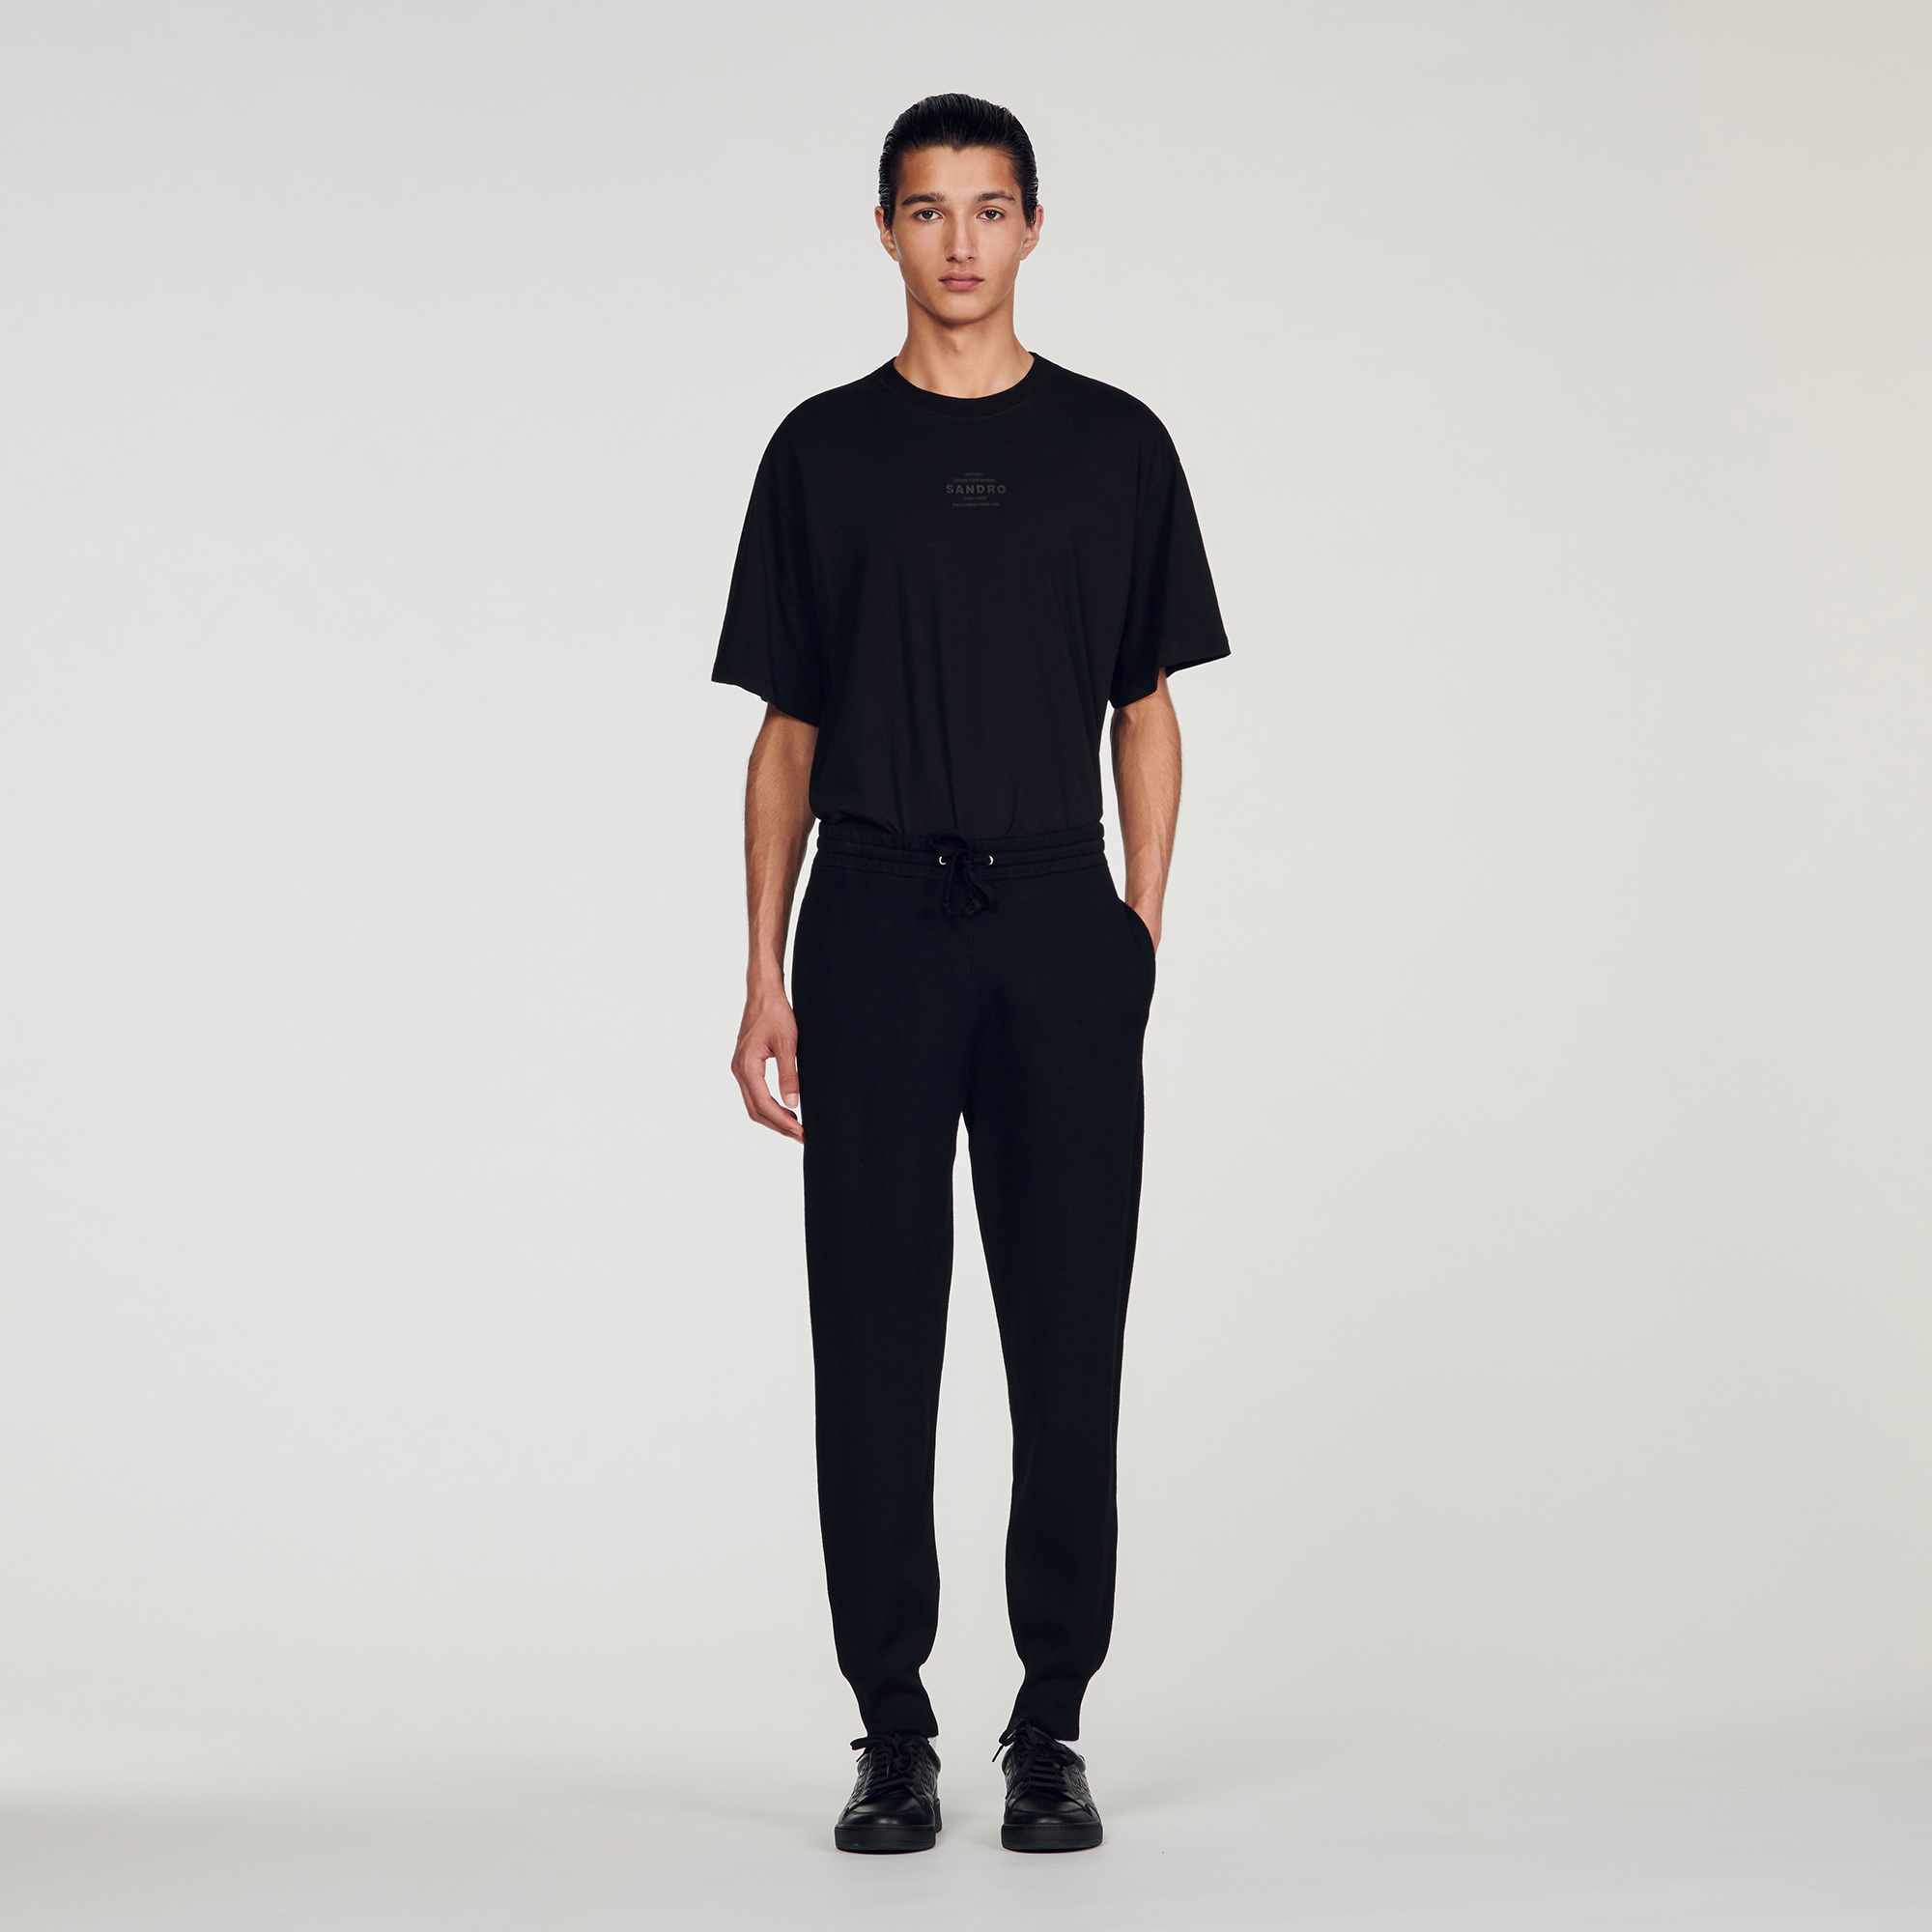 Sandro viscose Sandro men's jogging bottoms â€¢ Knit jogging bottoms â€¢ Smocked waistband with drawstring â€¢ Pockets at the sides â€¢ Ribbed trim finish Model is wearing a size S The viscose in this item has a lower environmental impact than traditional viscose